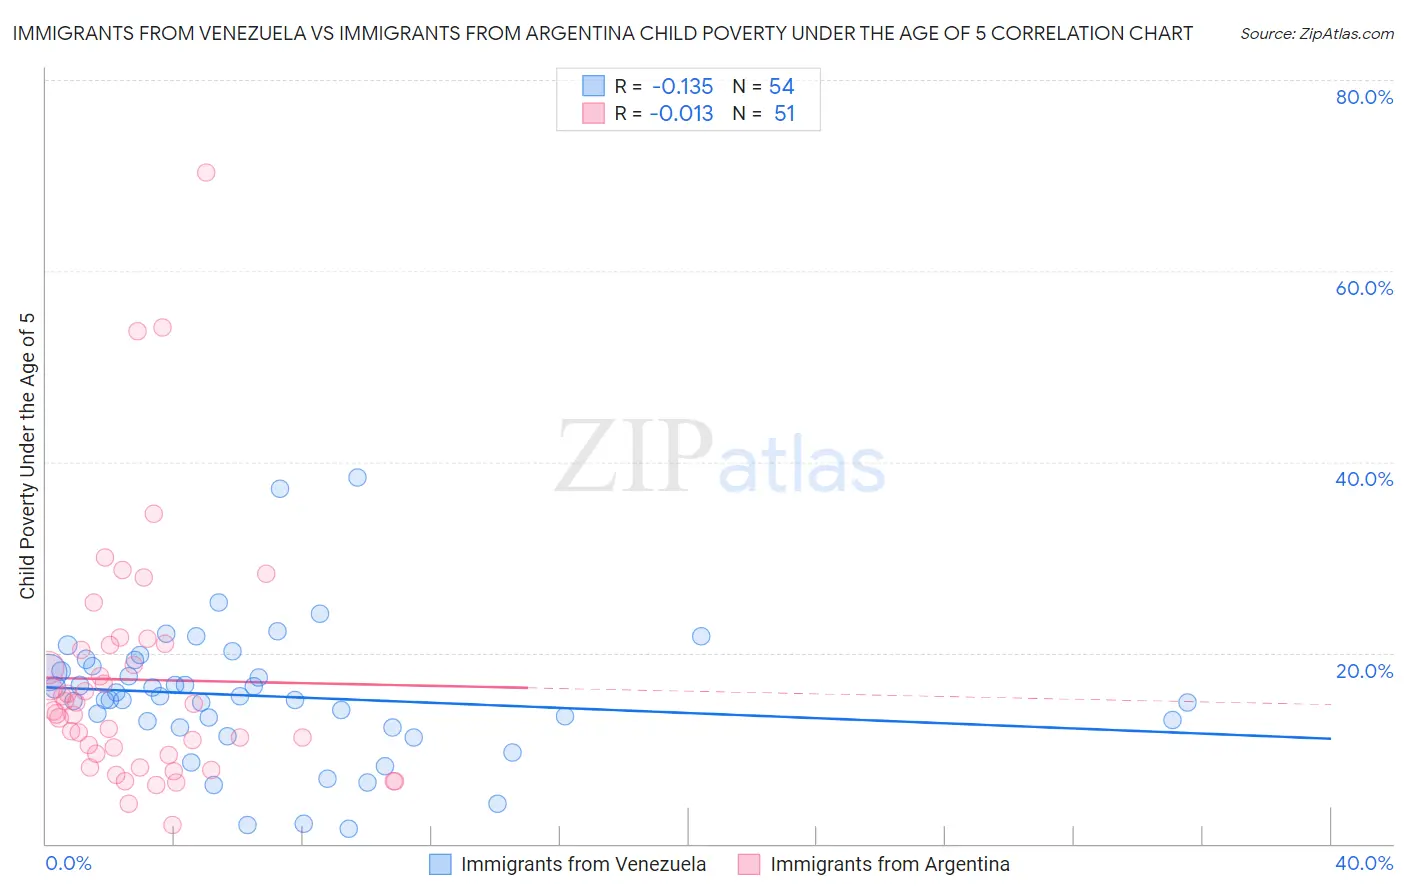 Immigrants from Venezuela vs Immigrants from Argentina Child Poverty Under the Age of 5